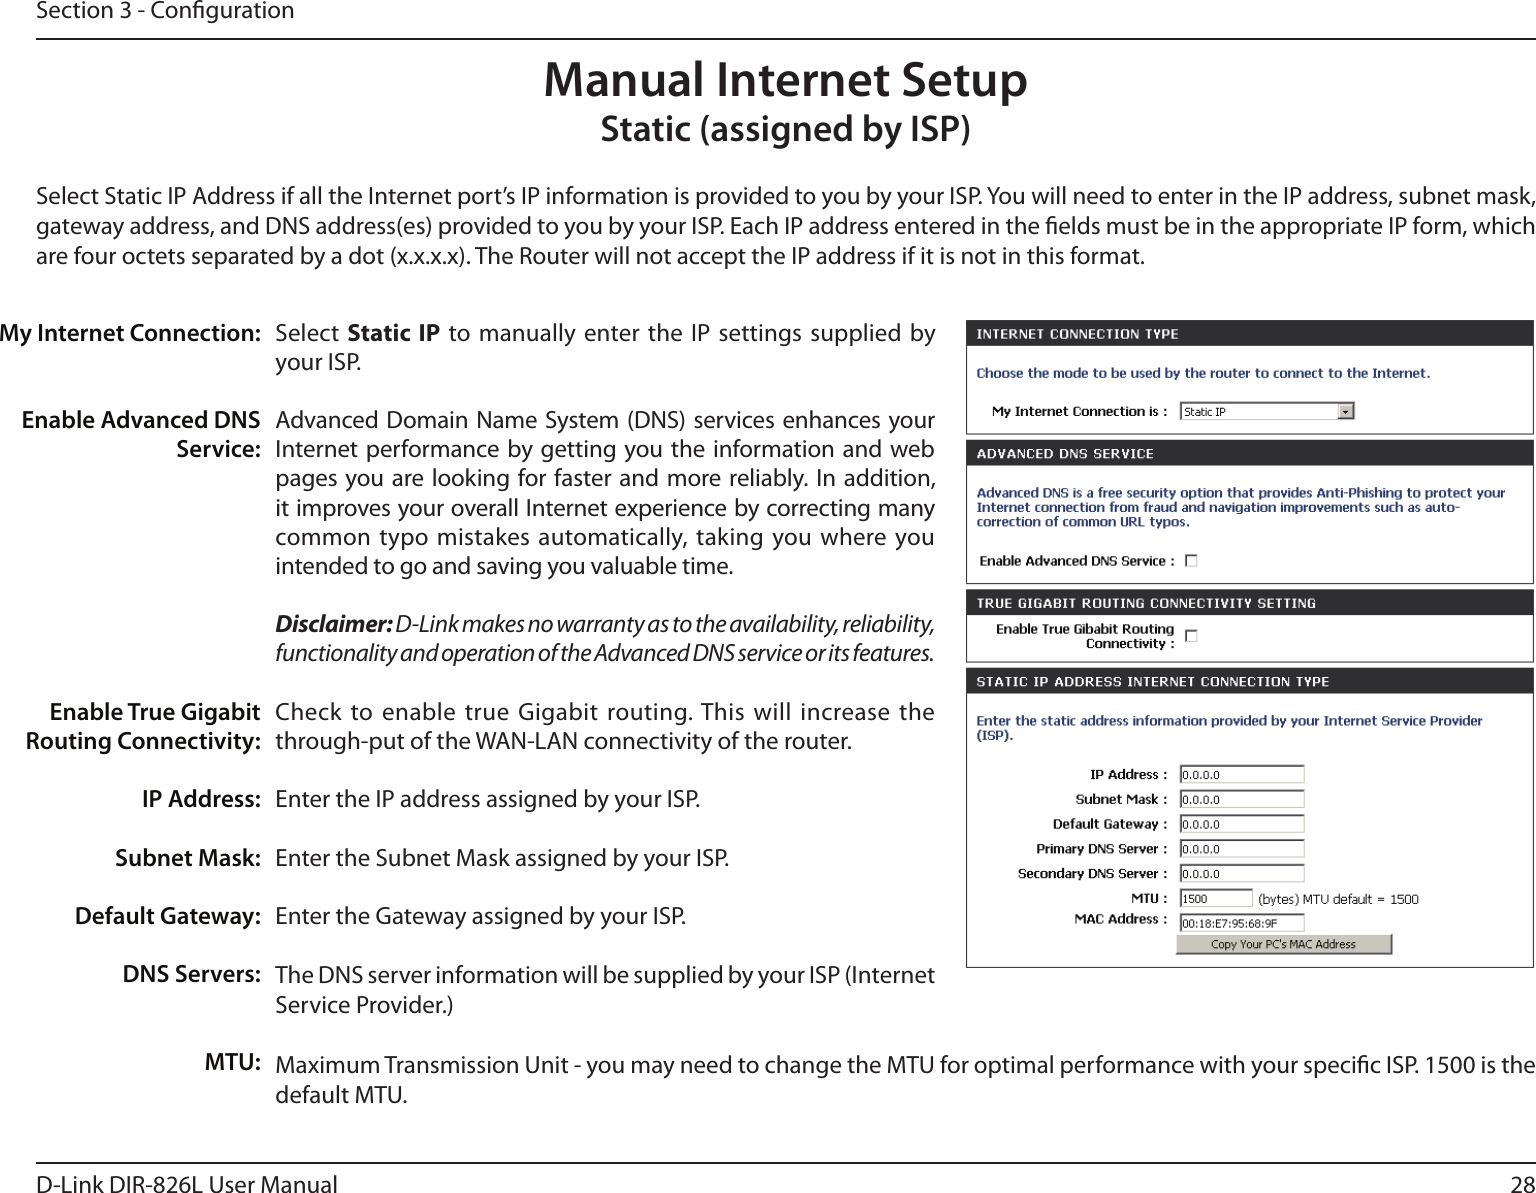 28D-Link DIR-826L User ManualSection 3 - CongurationSelect  Static IP  to manually  enter the IP settings  supplied by your ISP.Advanced Domain Name System (DNS) services enhances your Internet performance by getting you the information and web pages you are looking for faster and more reliably. In addition, it improves your overall Internet experience by correcting many common typo  mistakes automatically, taking you where you intended to go and saving you valuable time.Disclaimer: D-Link makes no warranty as to the availability, reliability, functionality and operation of the Advanced DNS service or its features.Check to enable true  Gigabit routing. This will increase the through-put of the WAN-LAN connectivity of the router.Enter the IP address assigned by your ISP.Enter the Subnet Mask assigned by your ISP.Enter the Gateway assigned by your ISP.The DNS server information will be supplied by your ISP (Internet Service Provider.)Maximum Transmission Unit - you may need to change the MTU for optimal performance with your specic ISP. 1500 is the default MTU.My Internet Connection:Enable Advanced DNS Service:Enable True Gigabit Routing Connectivity:IP Address:Subnet Mask:Default Gateway:DNS Servers:MTU:Manual Internet SetupStatic (assigned by ISP)Select Static IP Address if all the Internet port’s IP information is provided to you by your ISP. You will need to enter in the IP address, subnet mask, gateway address, and DNS address(es) provided to you by your ISP. Each IP address entered in the elds must be in the appropriate IP form, which are four octets separated by a dot (x.x.x.x). The Router will not accept the IP address if it is not in this format.